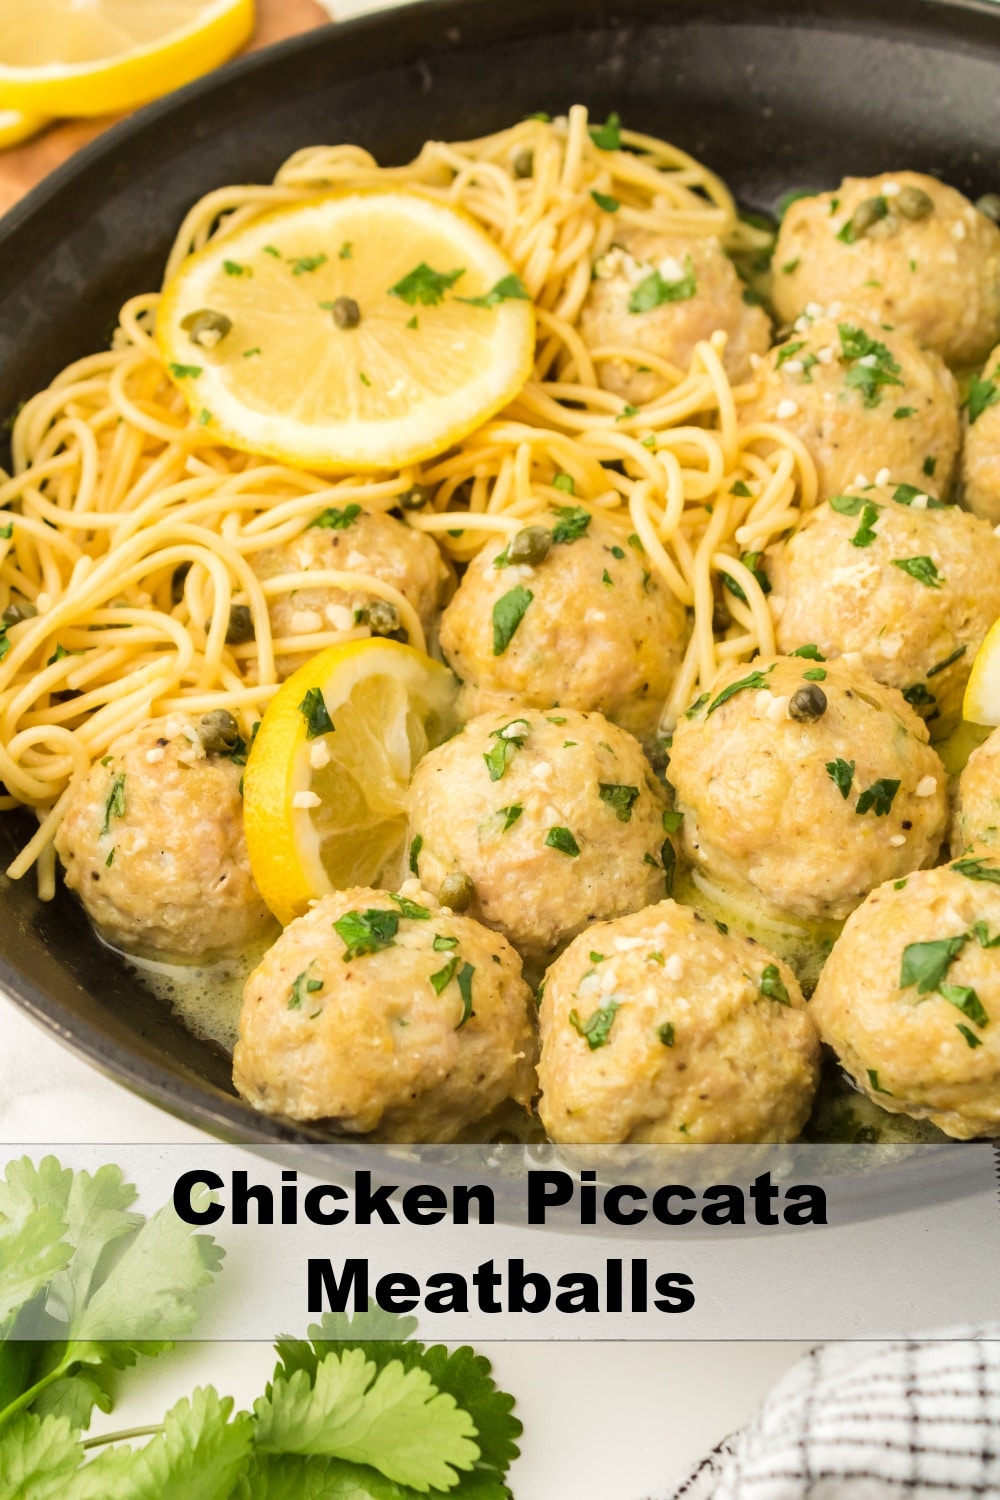 Chicken Piccata Meatballs are a tasty twist on the classic recipe usually made with chicken cutlets. This simple and easy meal is guaranteed to shake up your weekly dinner repertoire in a very good way. via @cmpollak1